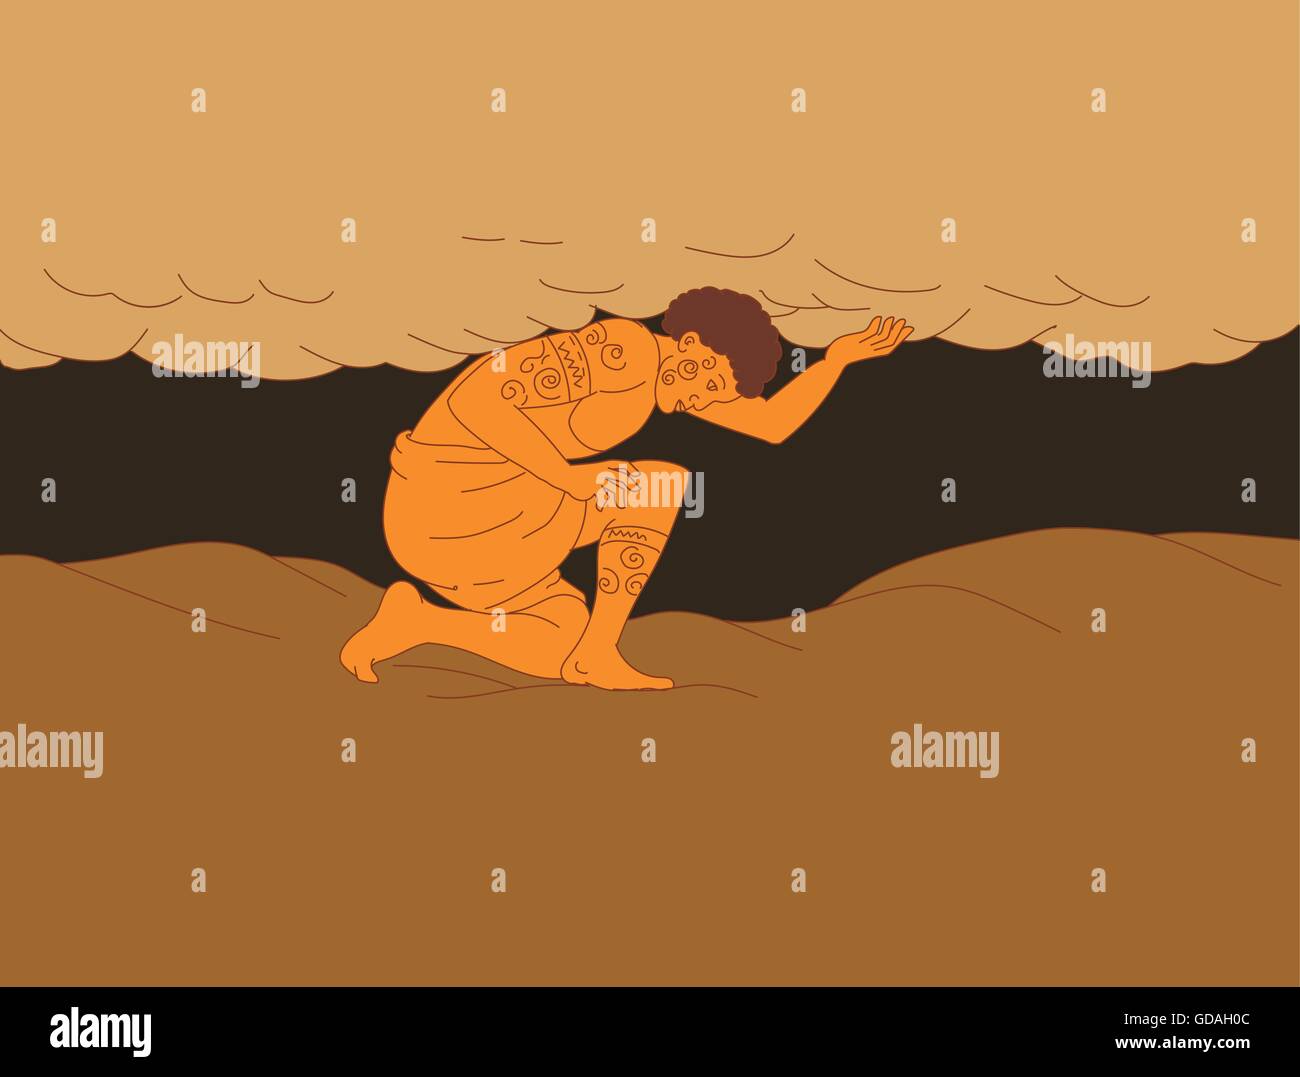 Drawing sketch style illustration of a Samoan Atlas kneeling looking to the ground holding sky from earth viewed from the side. Stock Vector